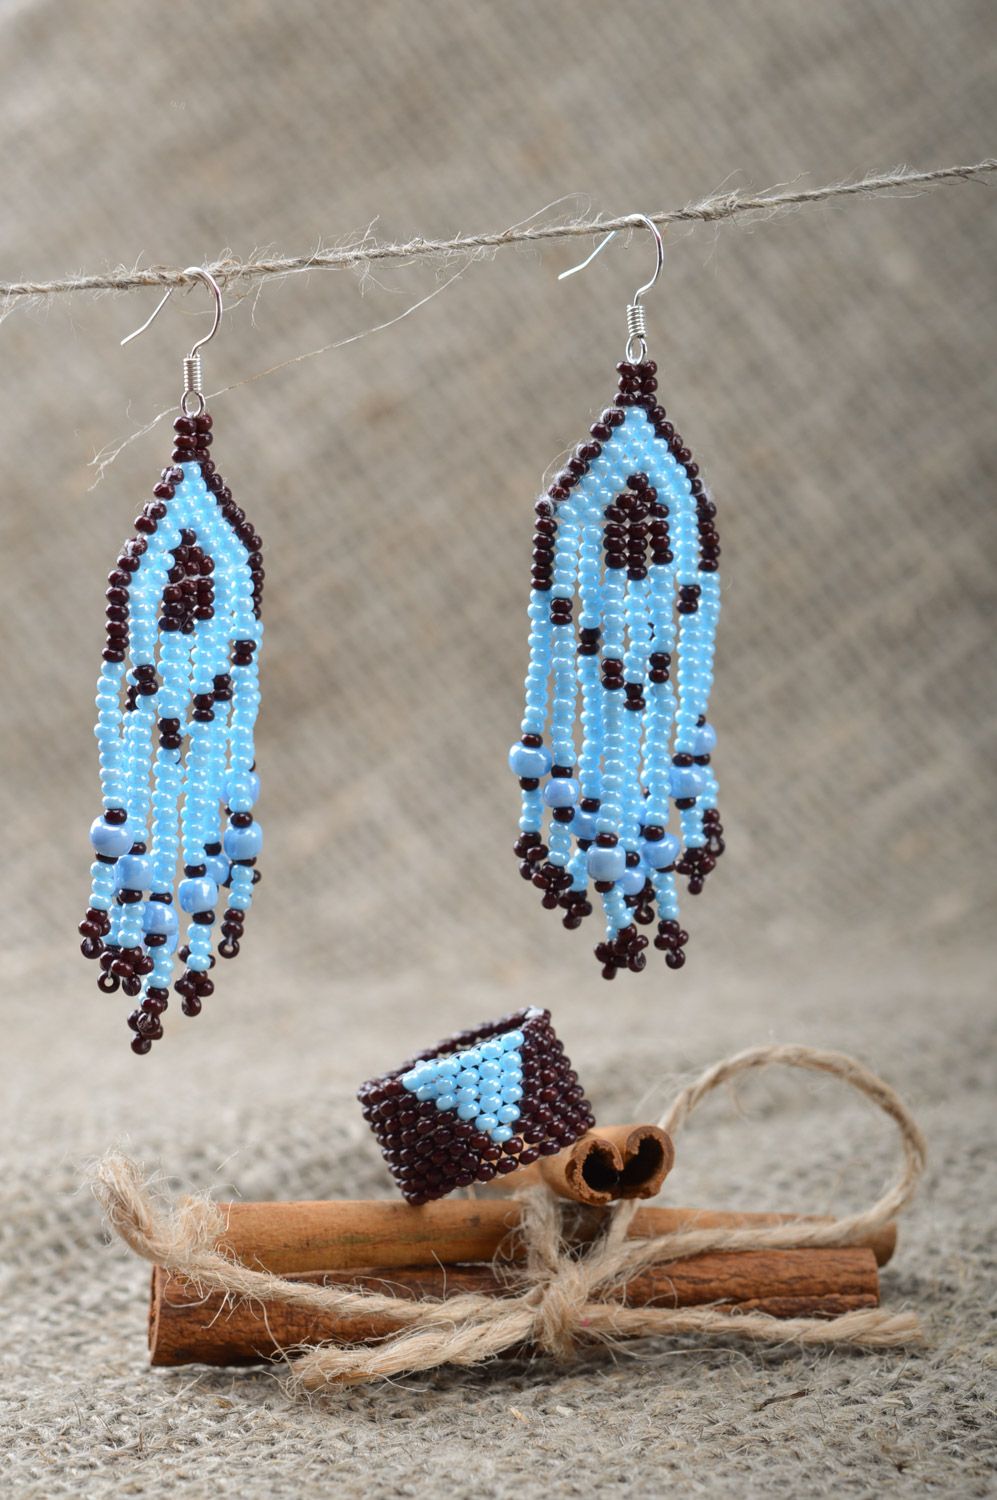 Handmade designer women's beaded jewelry set 2 items earrings and ring Blue and Black photo 1